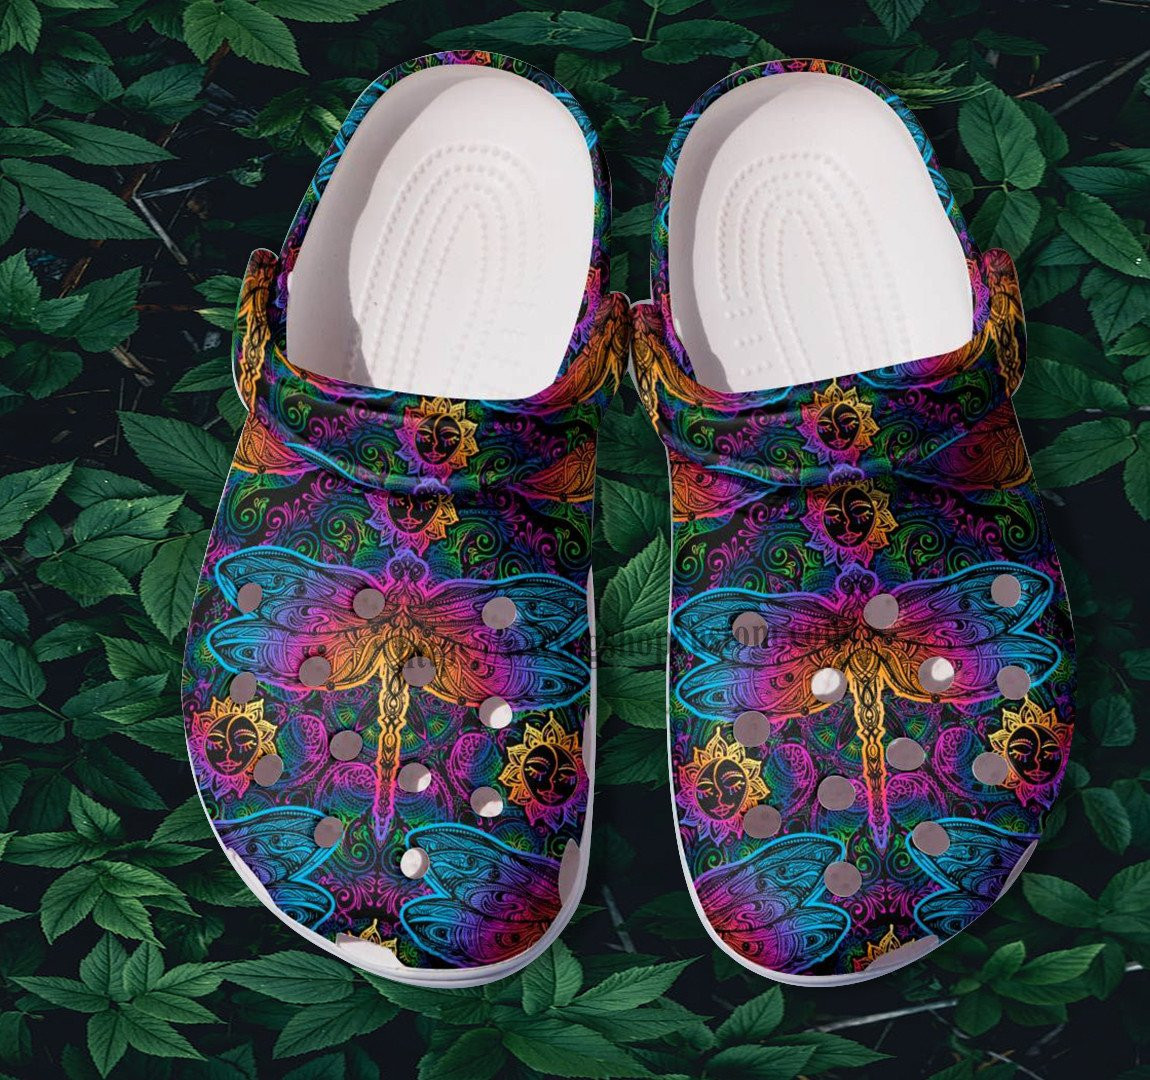 Gift Step Daughter Crocs Shoes Dragonfly Hippie Boho - Dragonfly Rainbow Vintage Clogs Gift Women Birthday Day